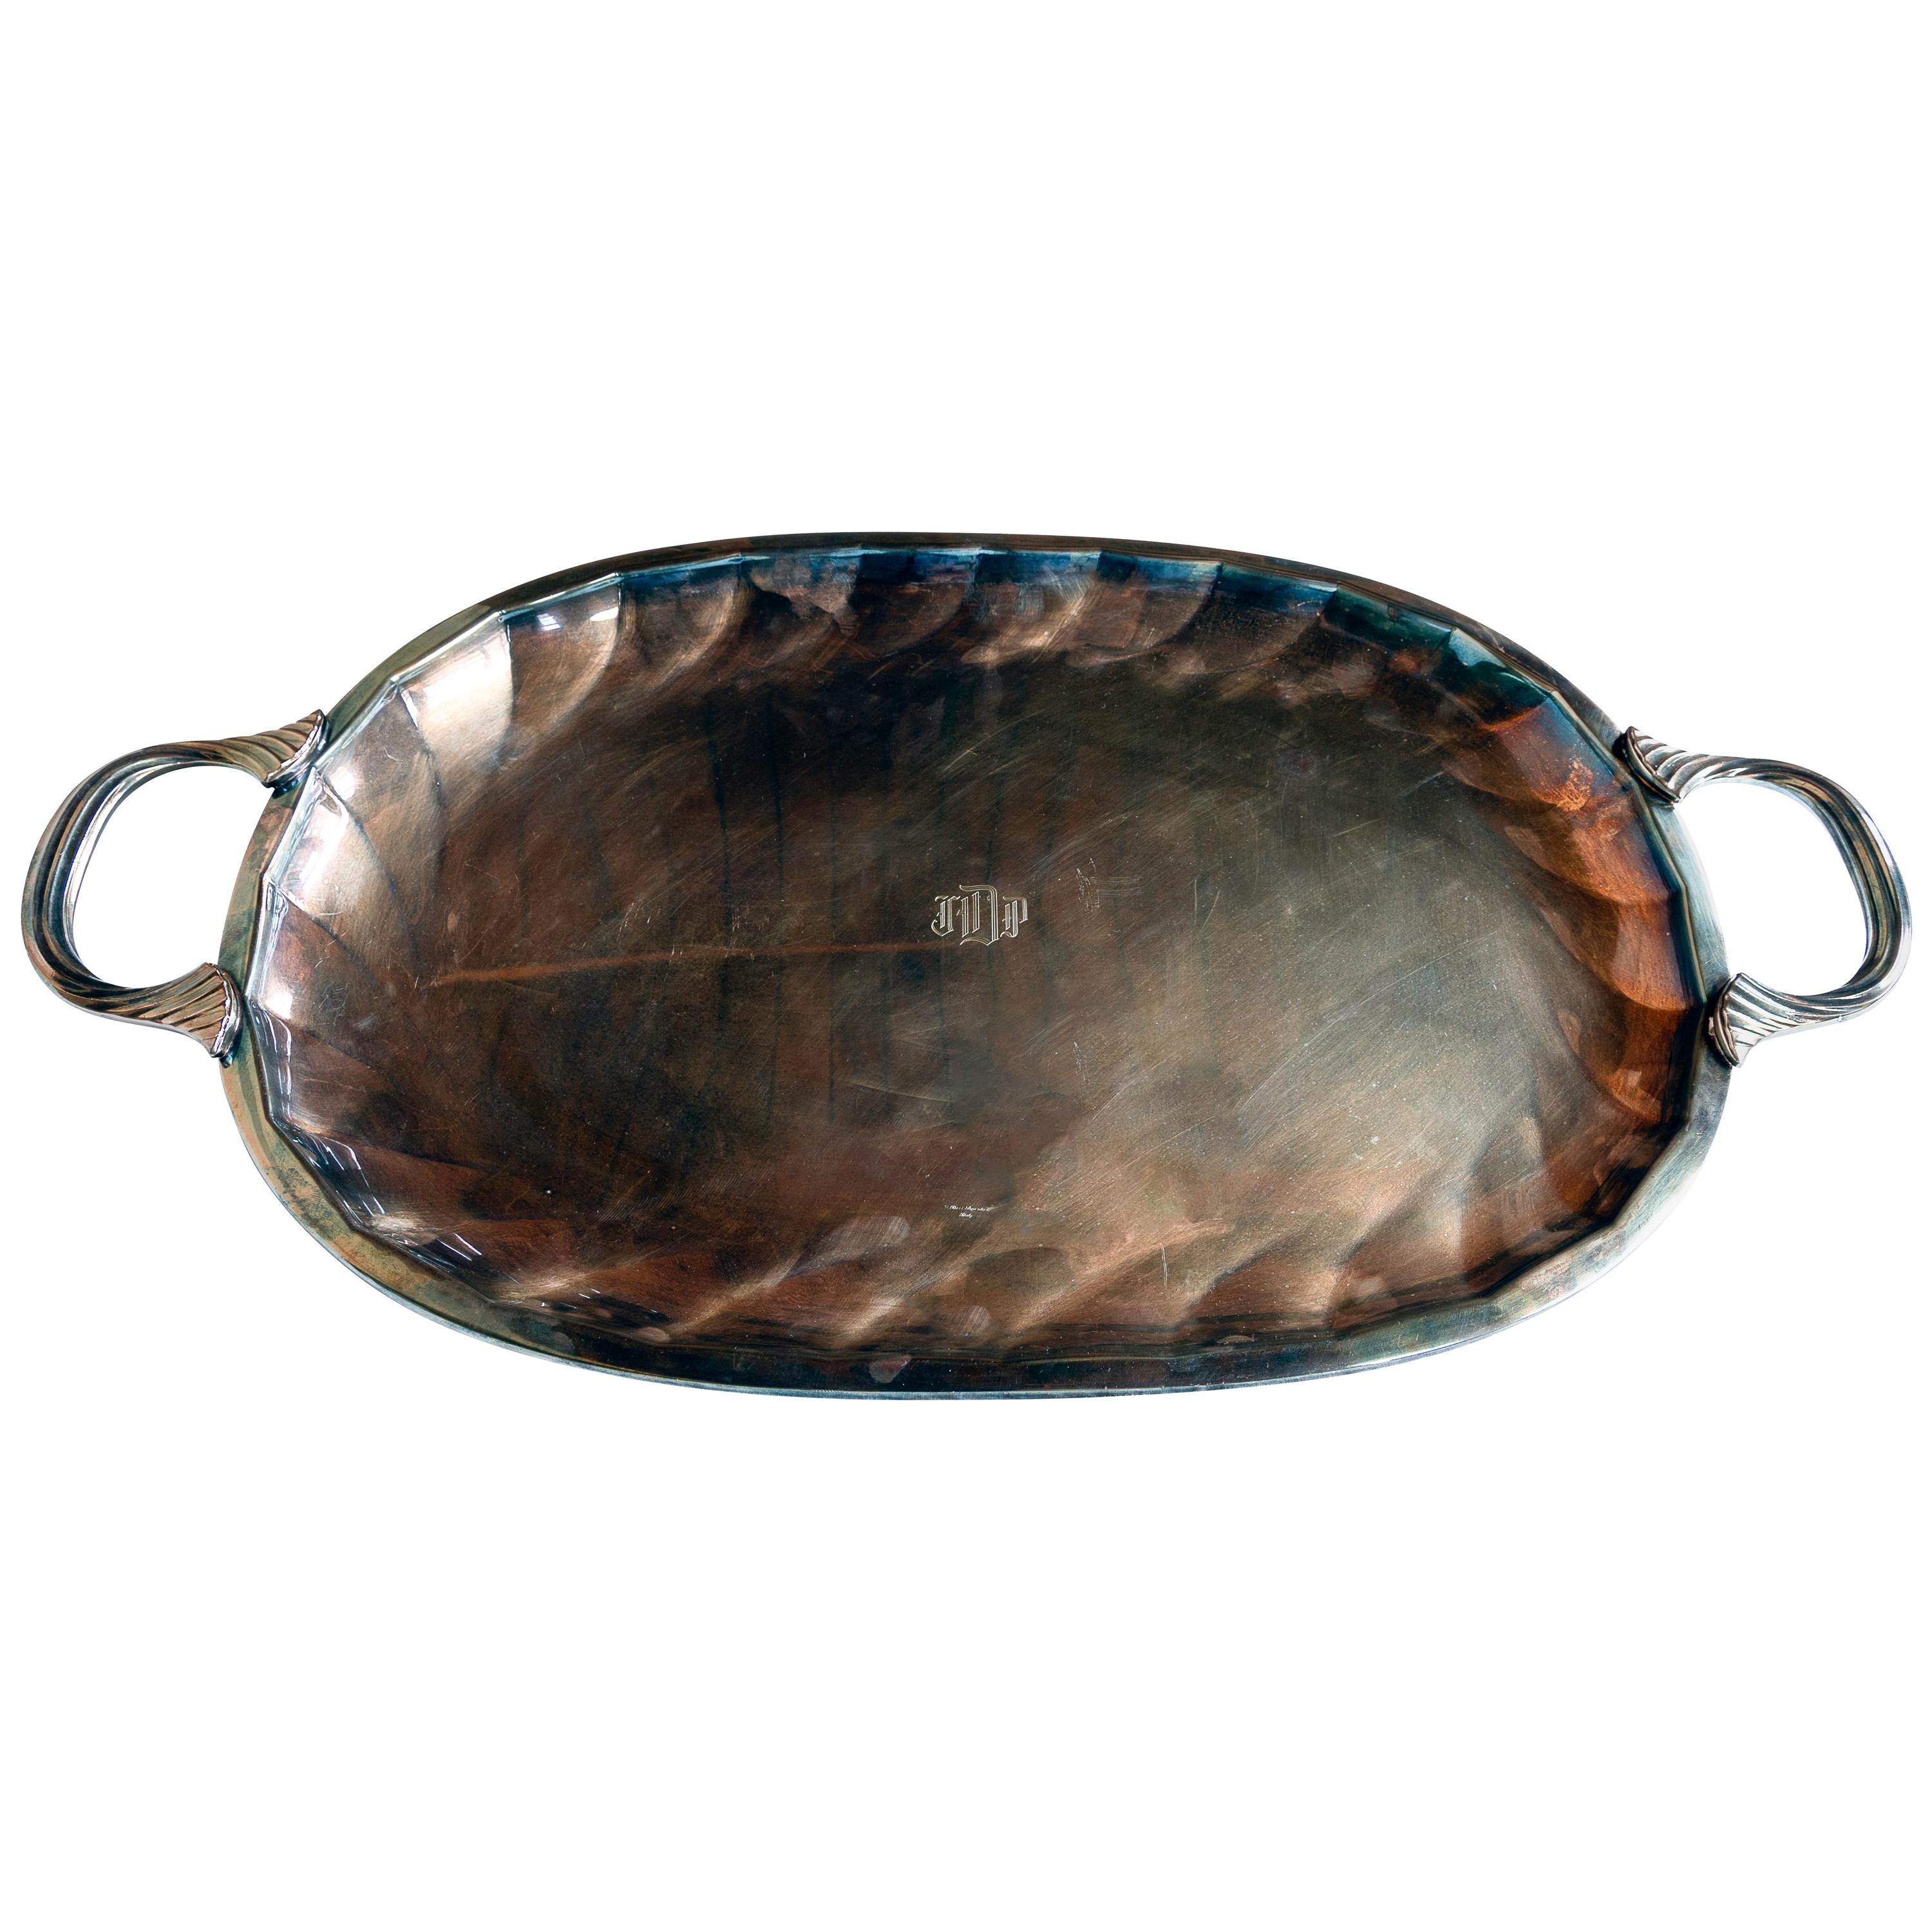 Ricci Argentieri Italy Large Silver Serving Tray, 1950s